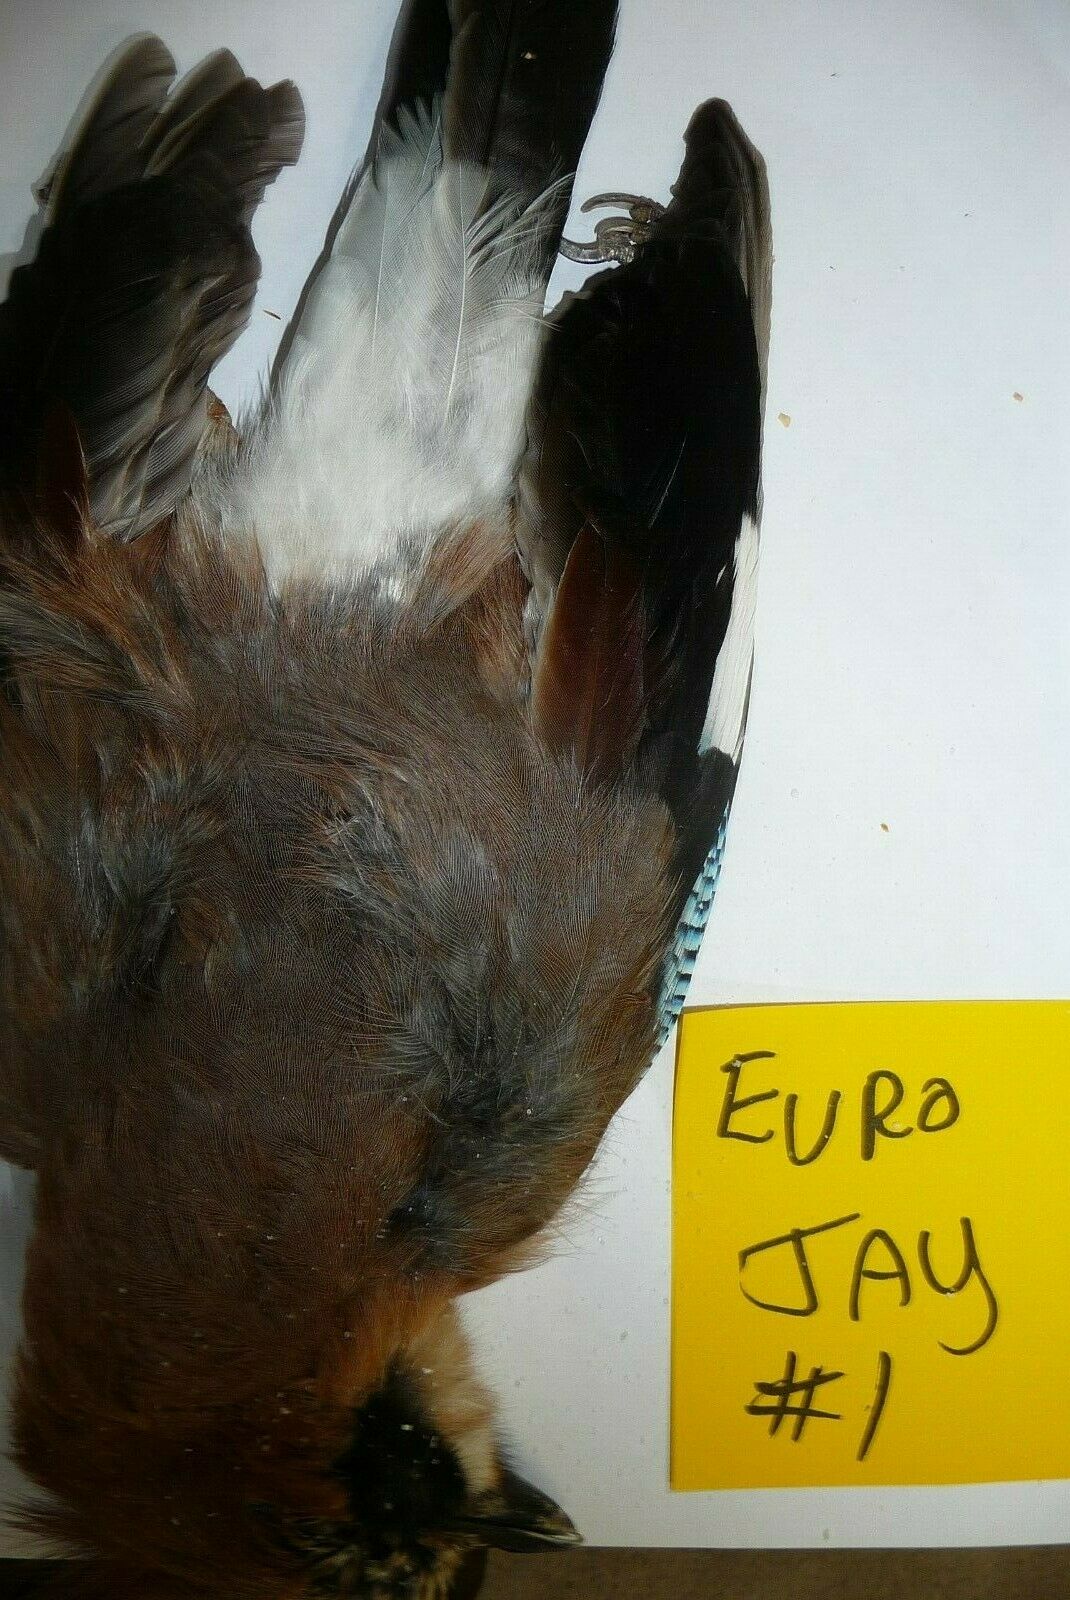 European Jay Bird #1 Salted Skin For Taxidermy Or Fly Ty